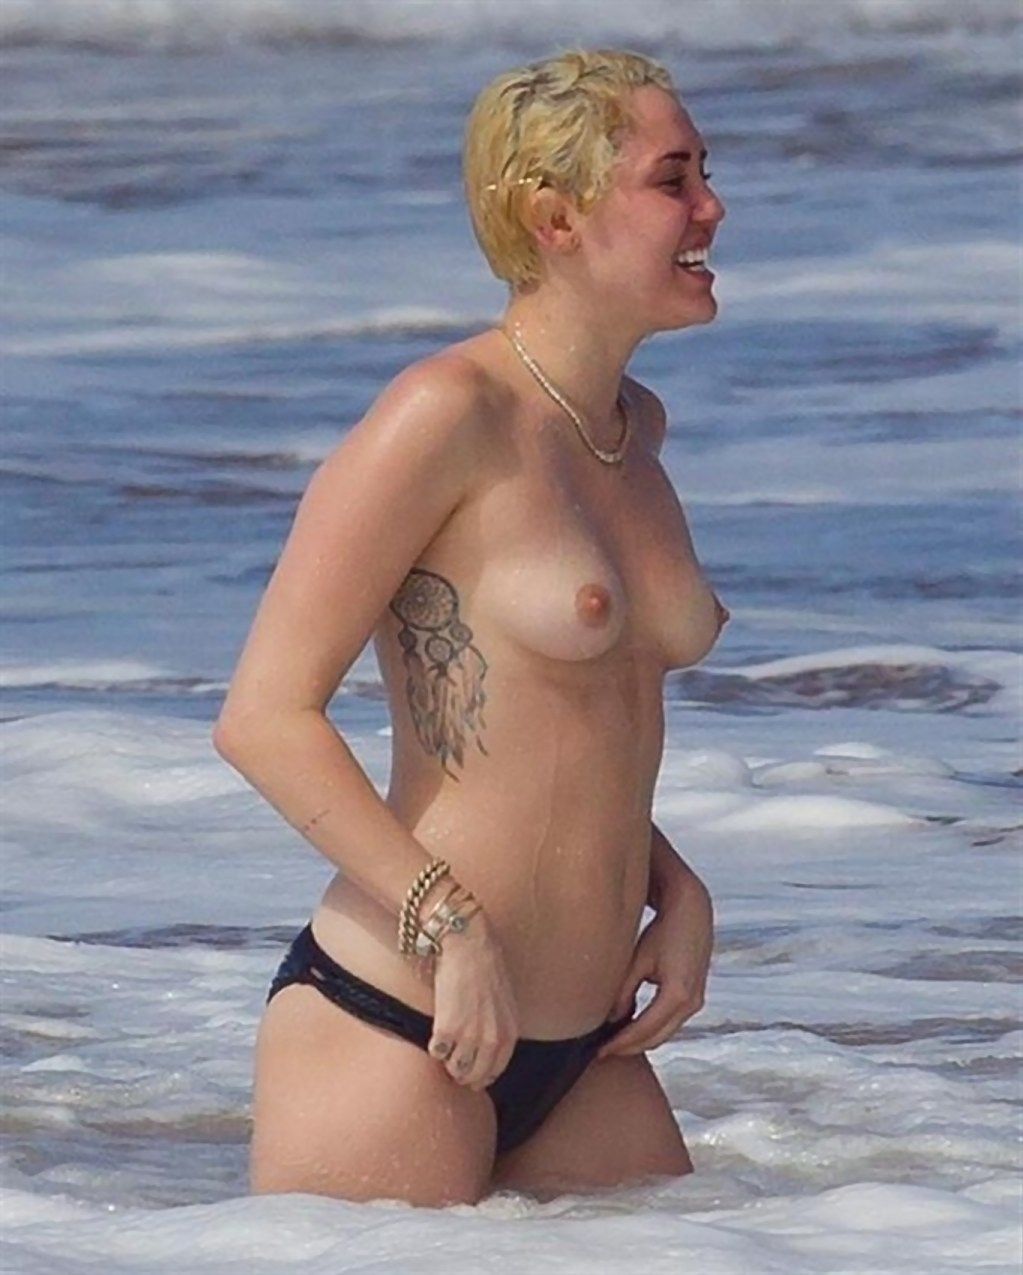 Miley cyrus tattoos and topless at the beach in hawaii